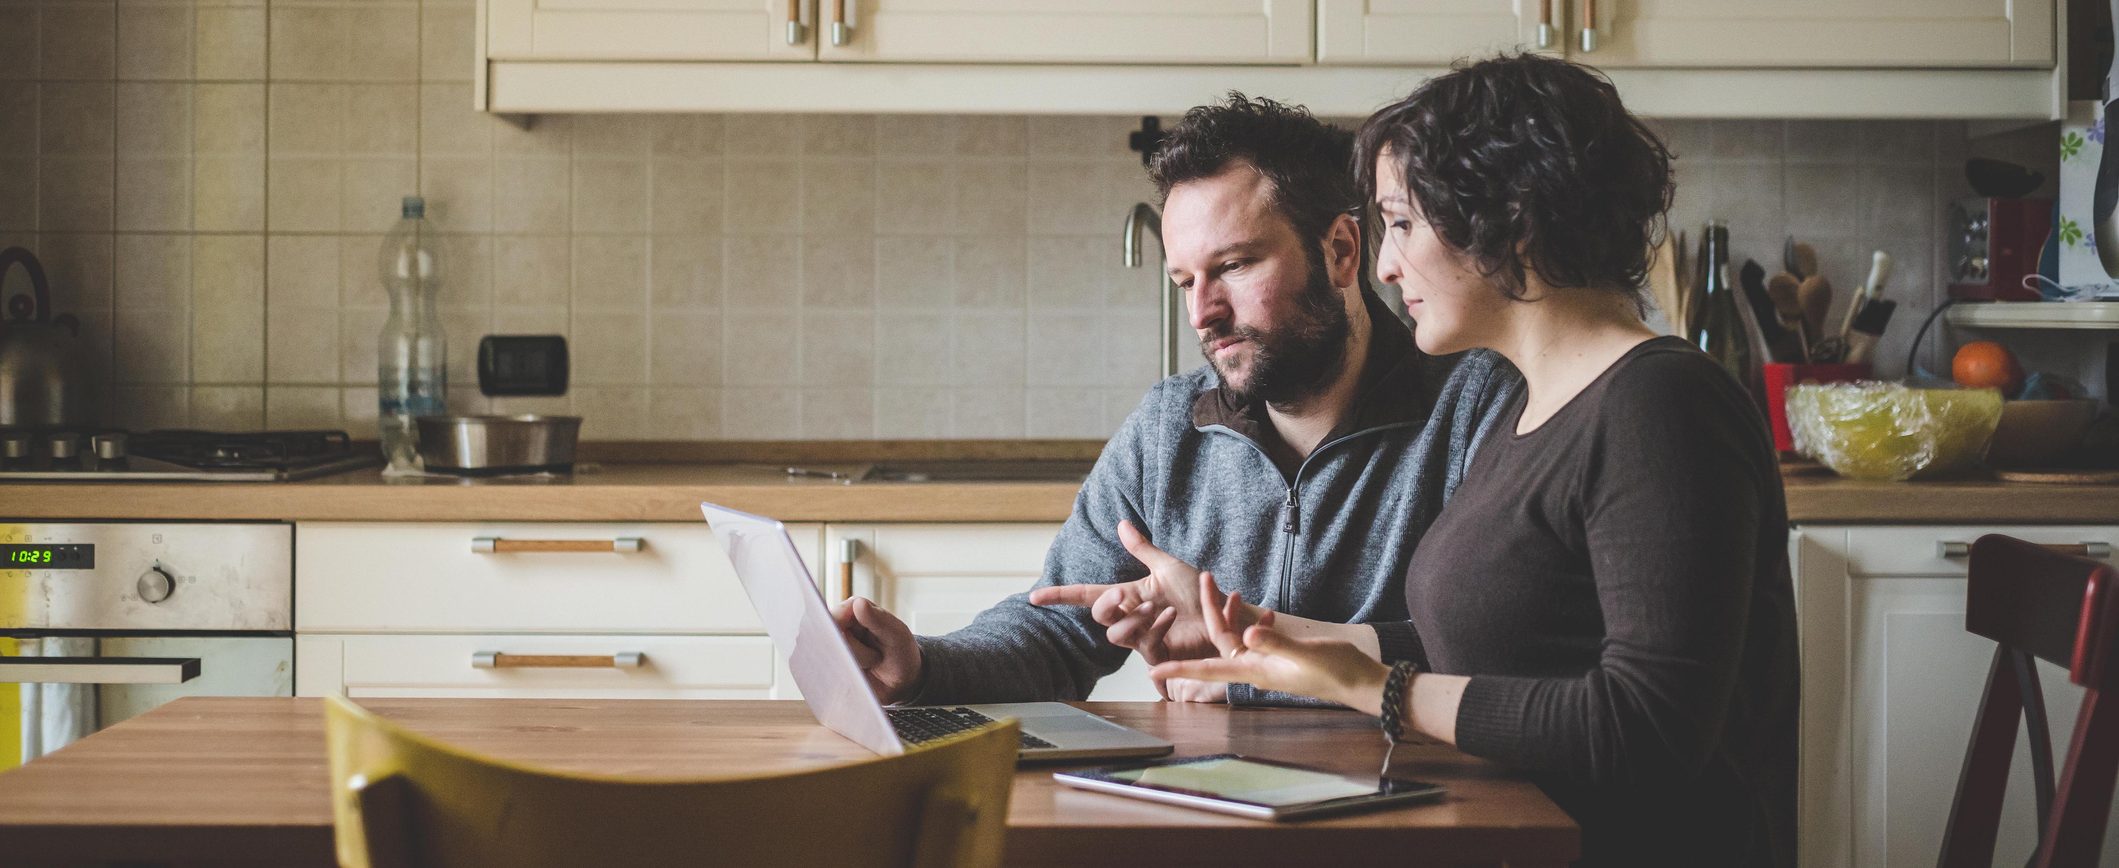 A married couple sitting at their kitchen table, discussing their emergency finance plan as they look at a lap computer screen.